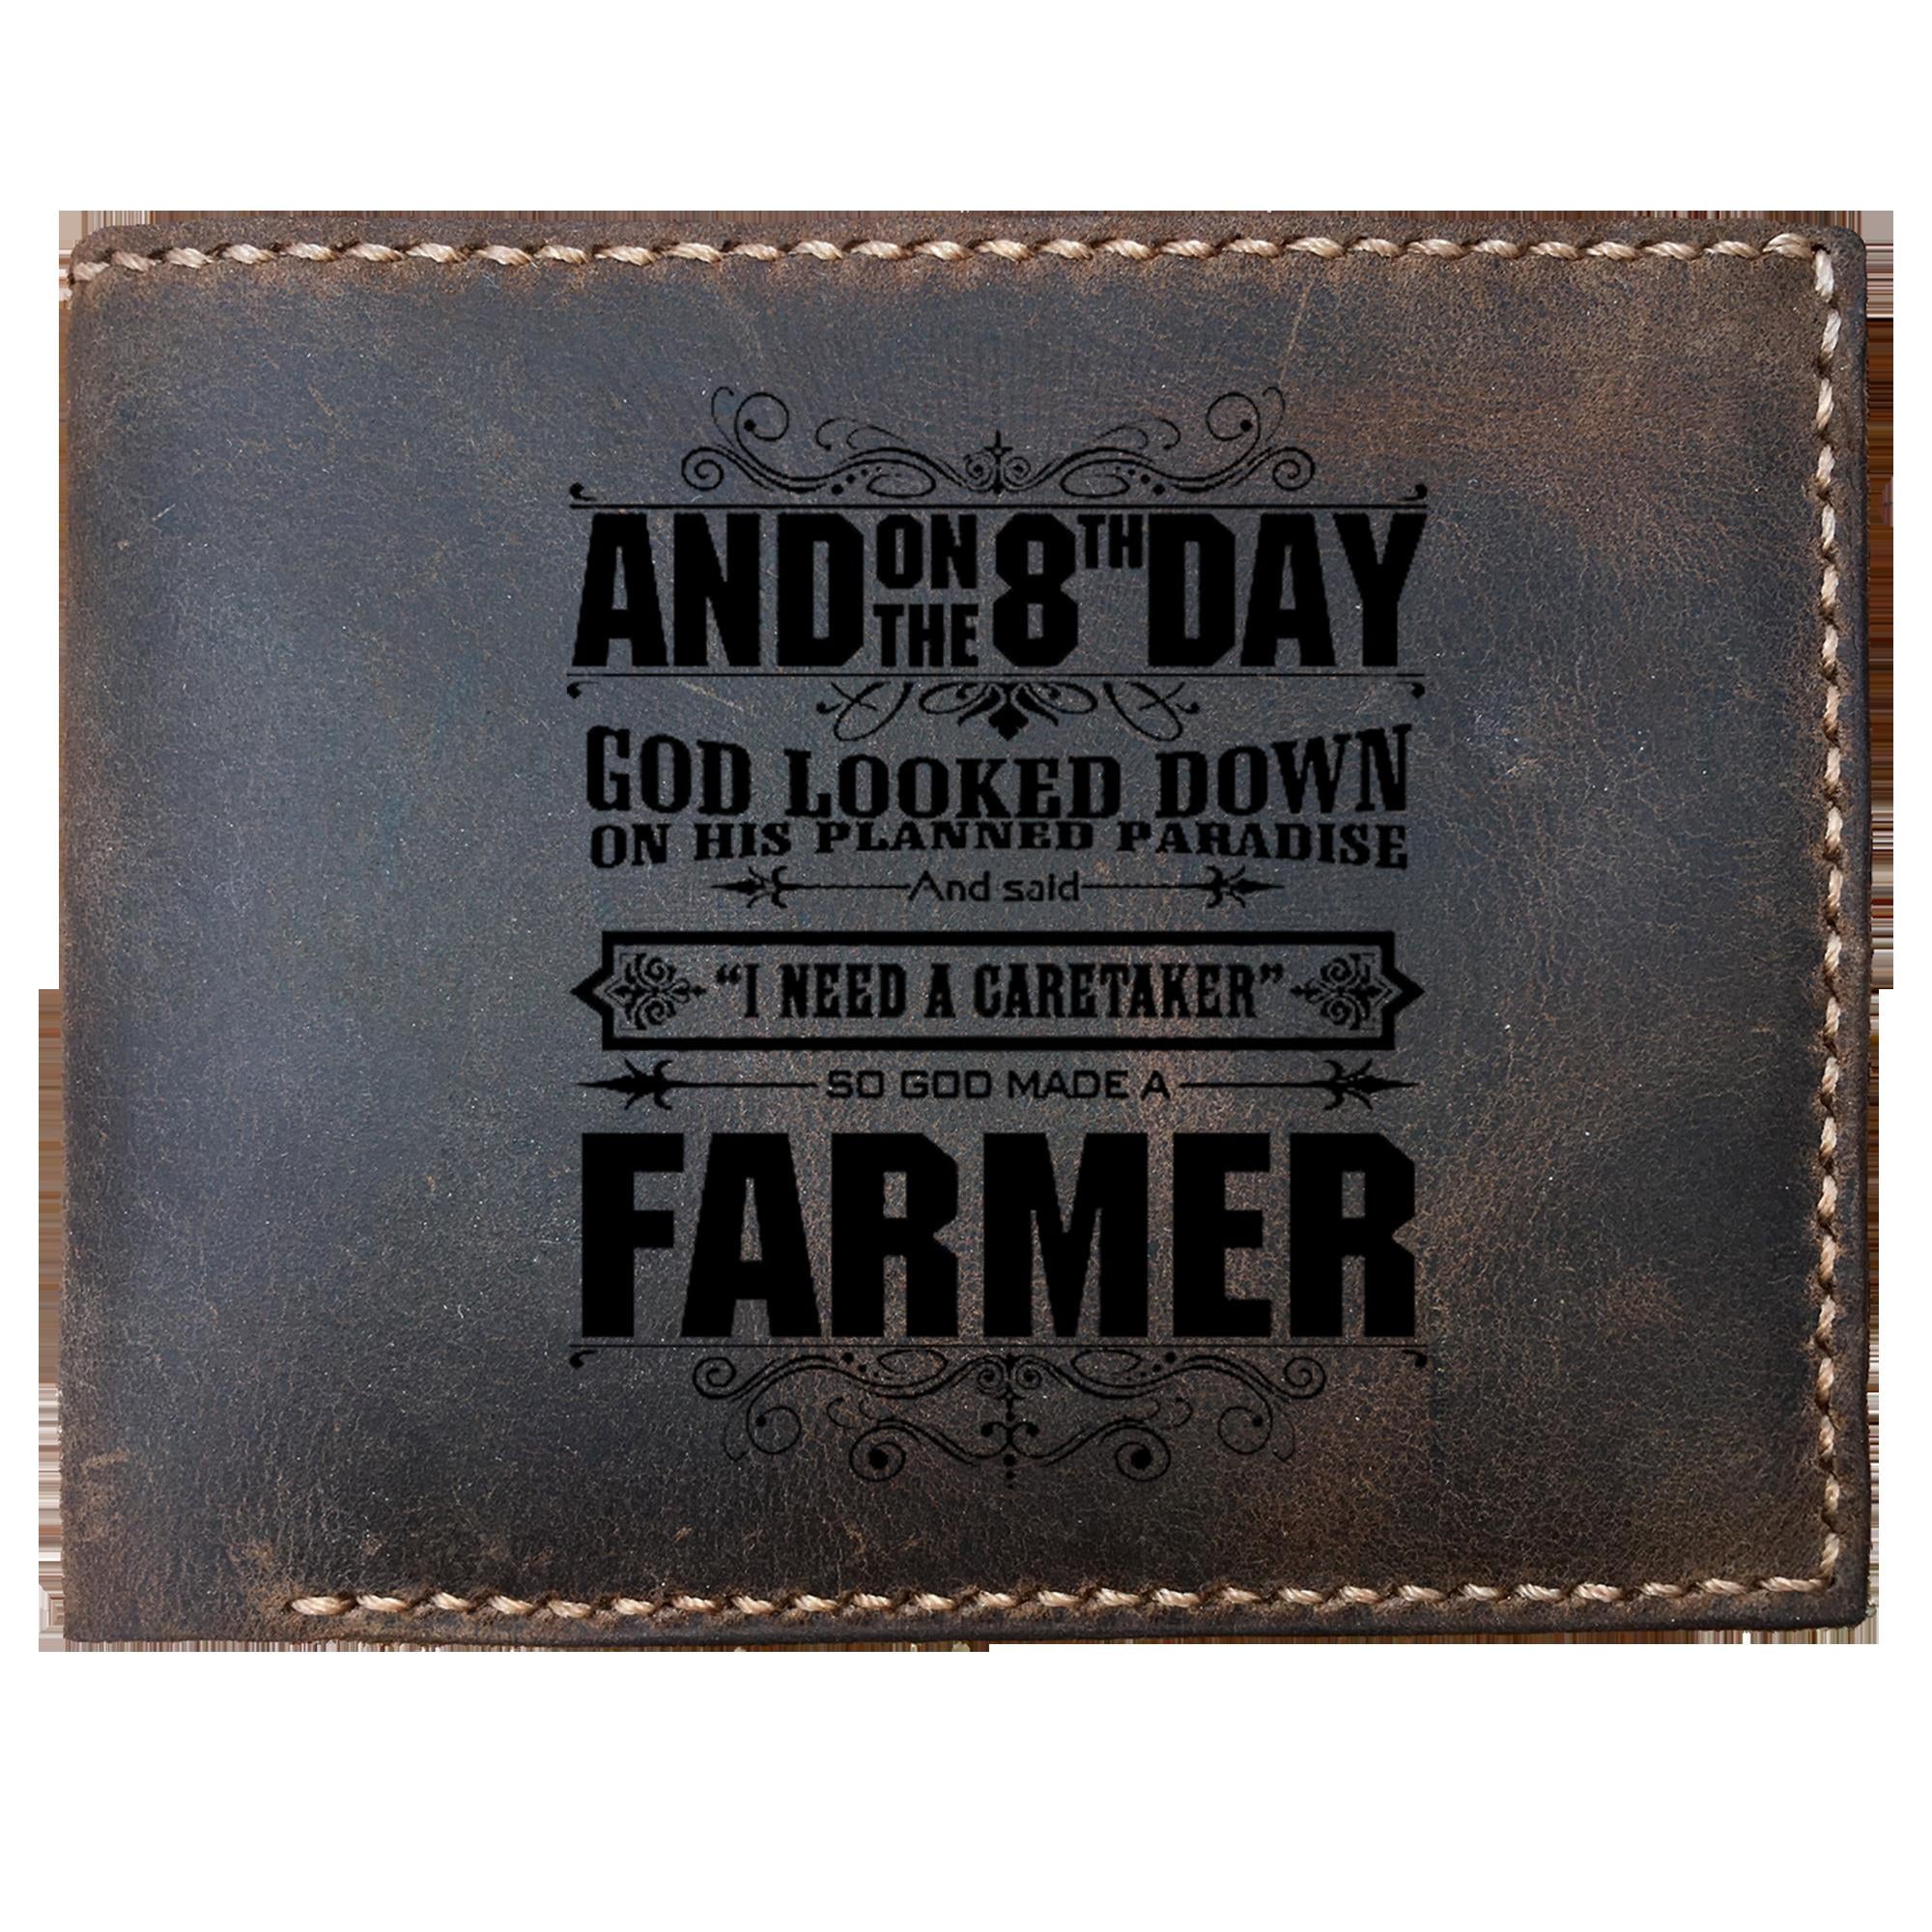 Skitongifts Funny Custom Laser Engraved Bifold Leather Wallet For Men, Funny Farmer I Need A Caretaker So God Made A Farmer